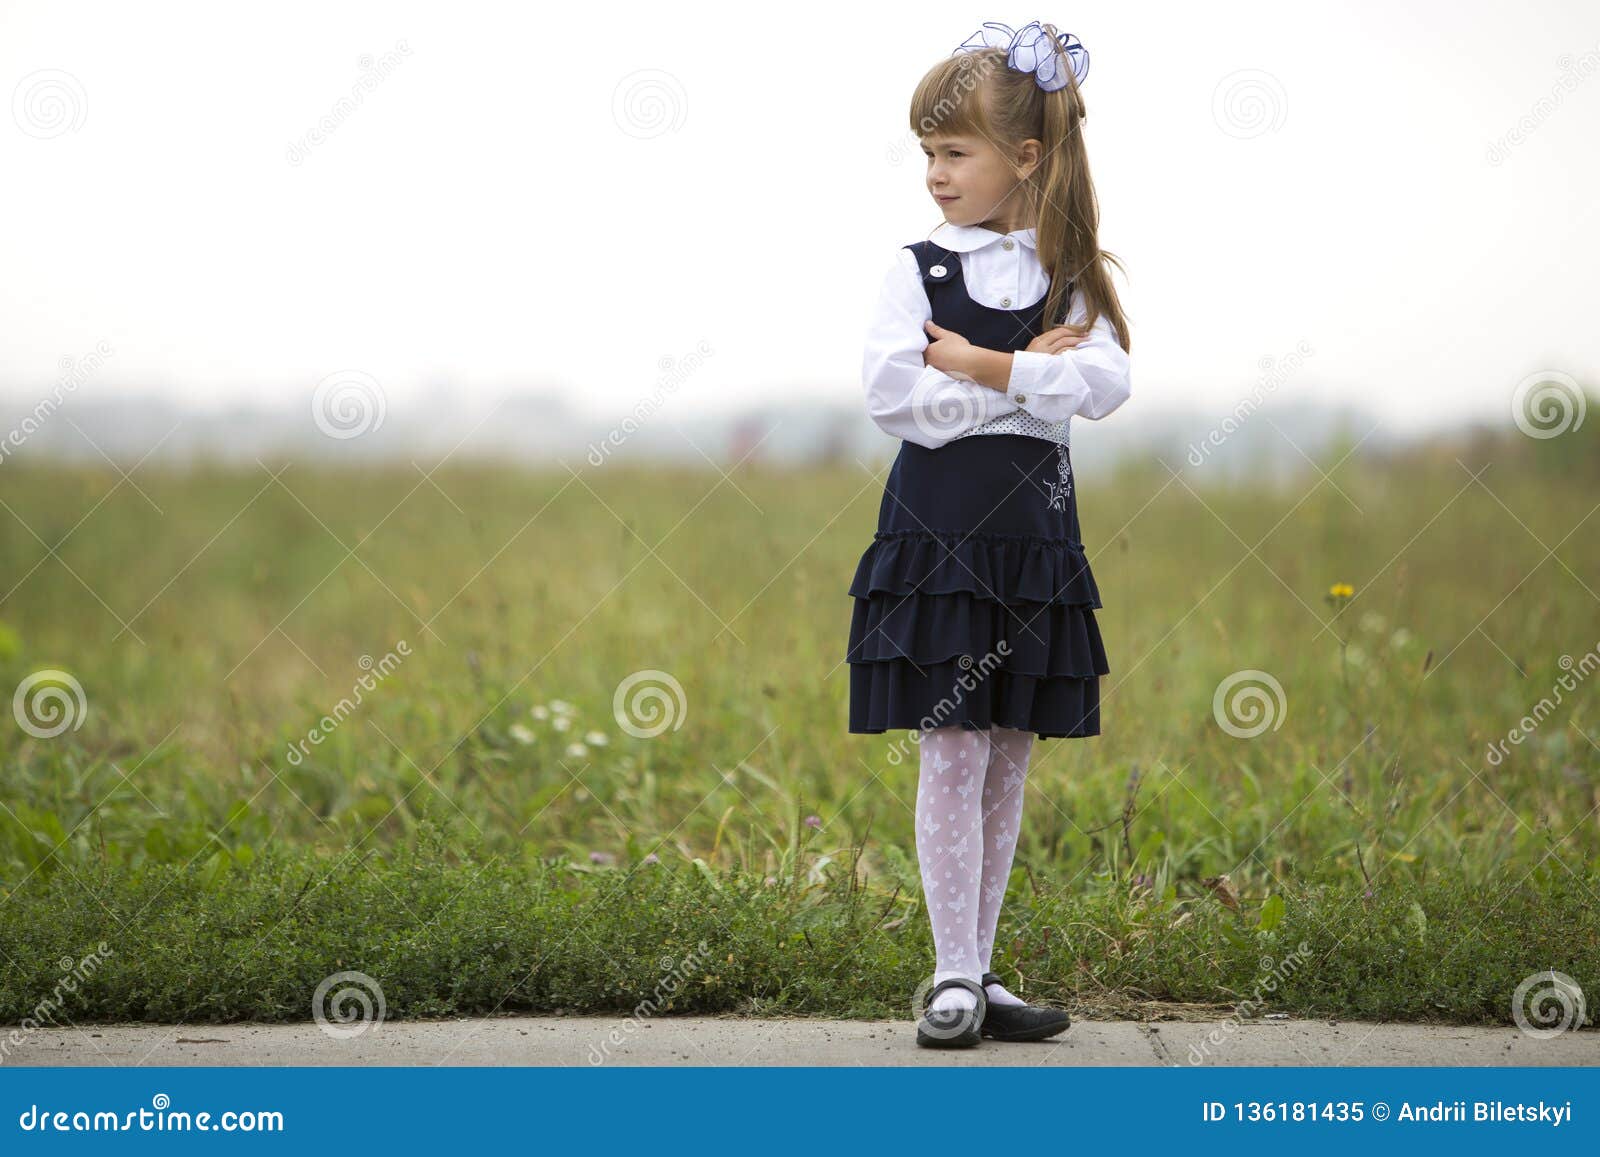 Full Length Portrait Of Cute Adorable Serious Thoughtful First Grader 